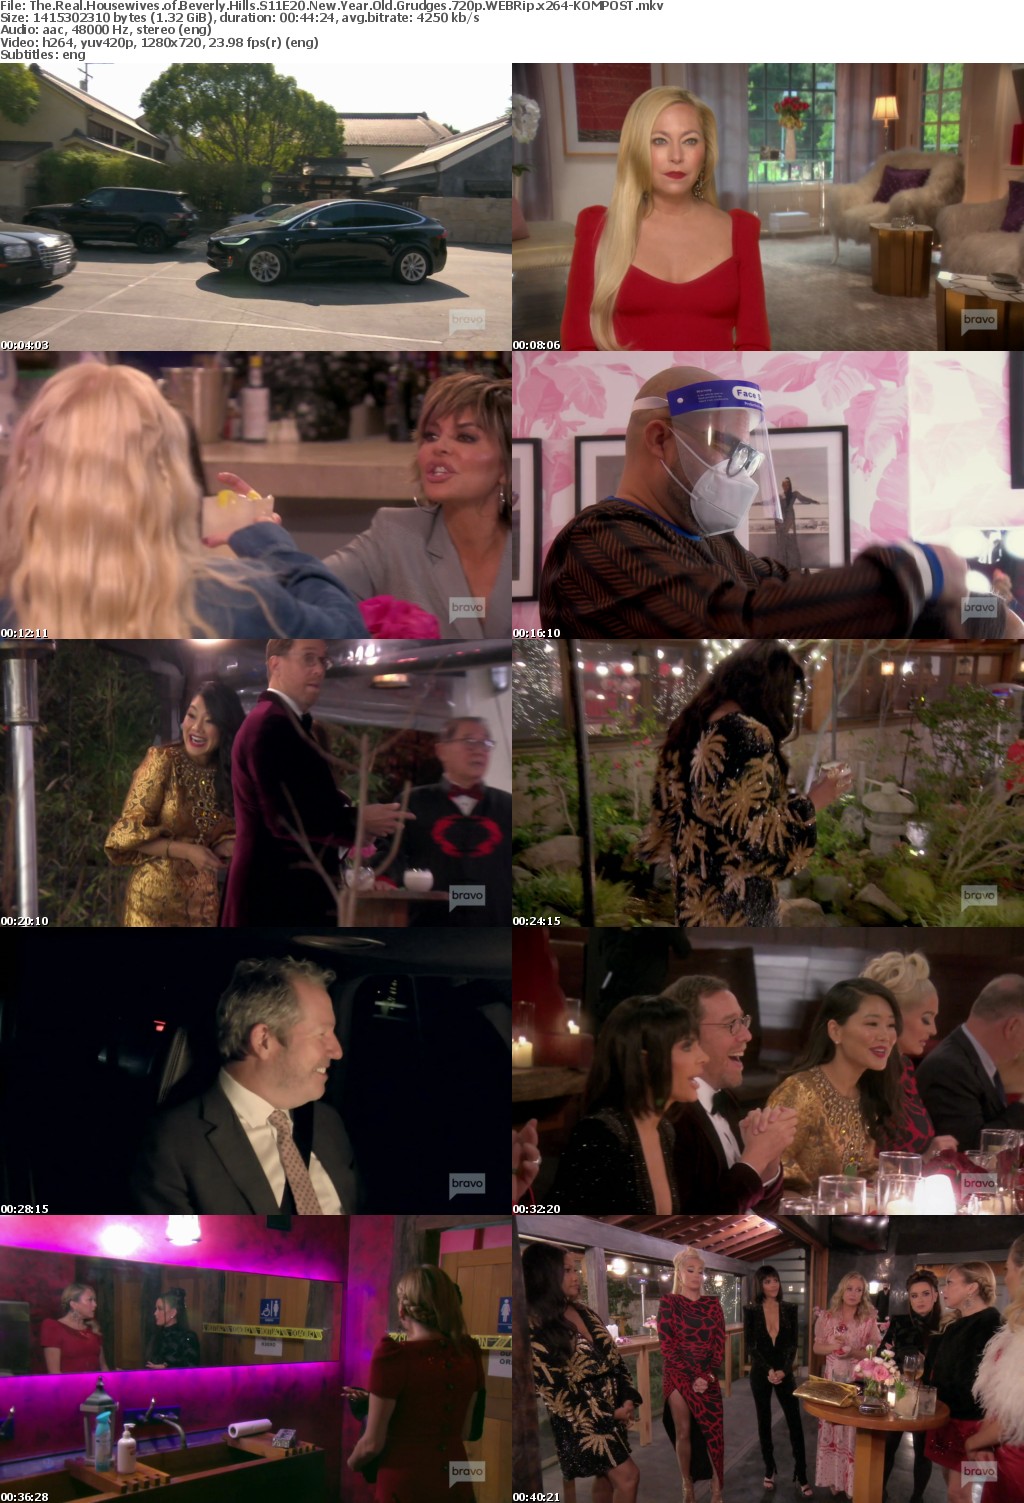 The Real Housewives of Beverly Hills S11E20 New Year Old Grudges 720p WEBRip x264-KOMPOST